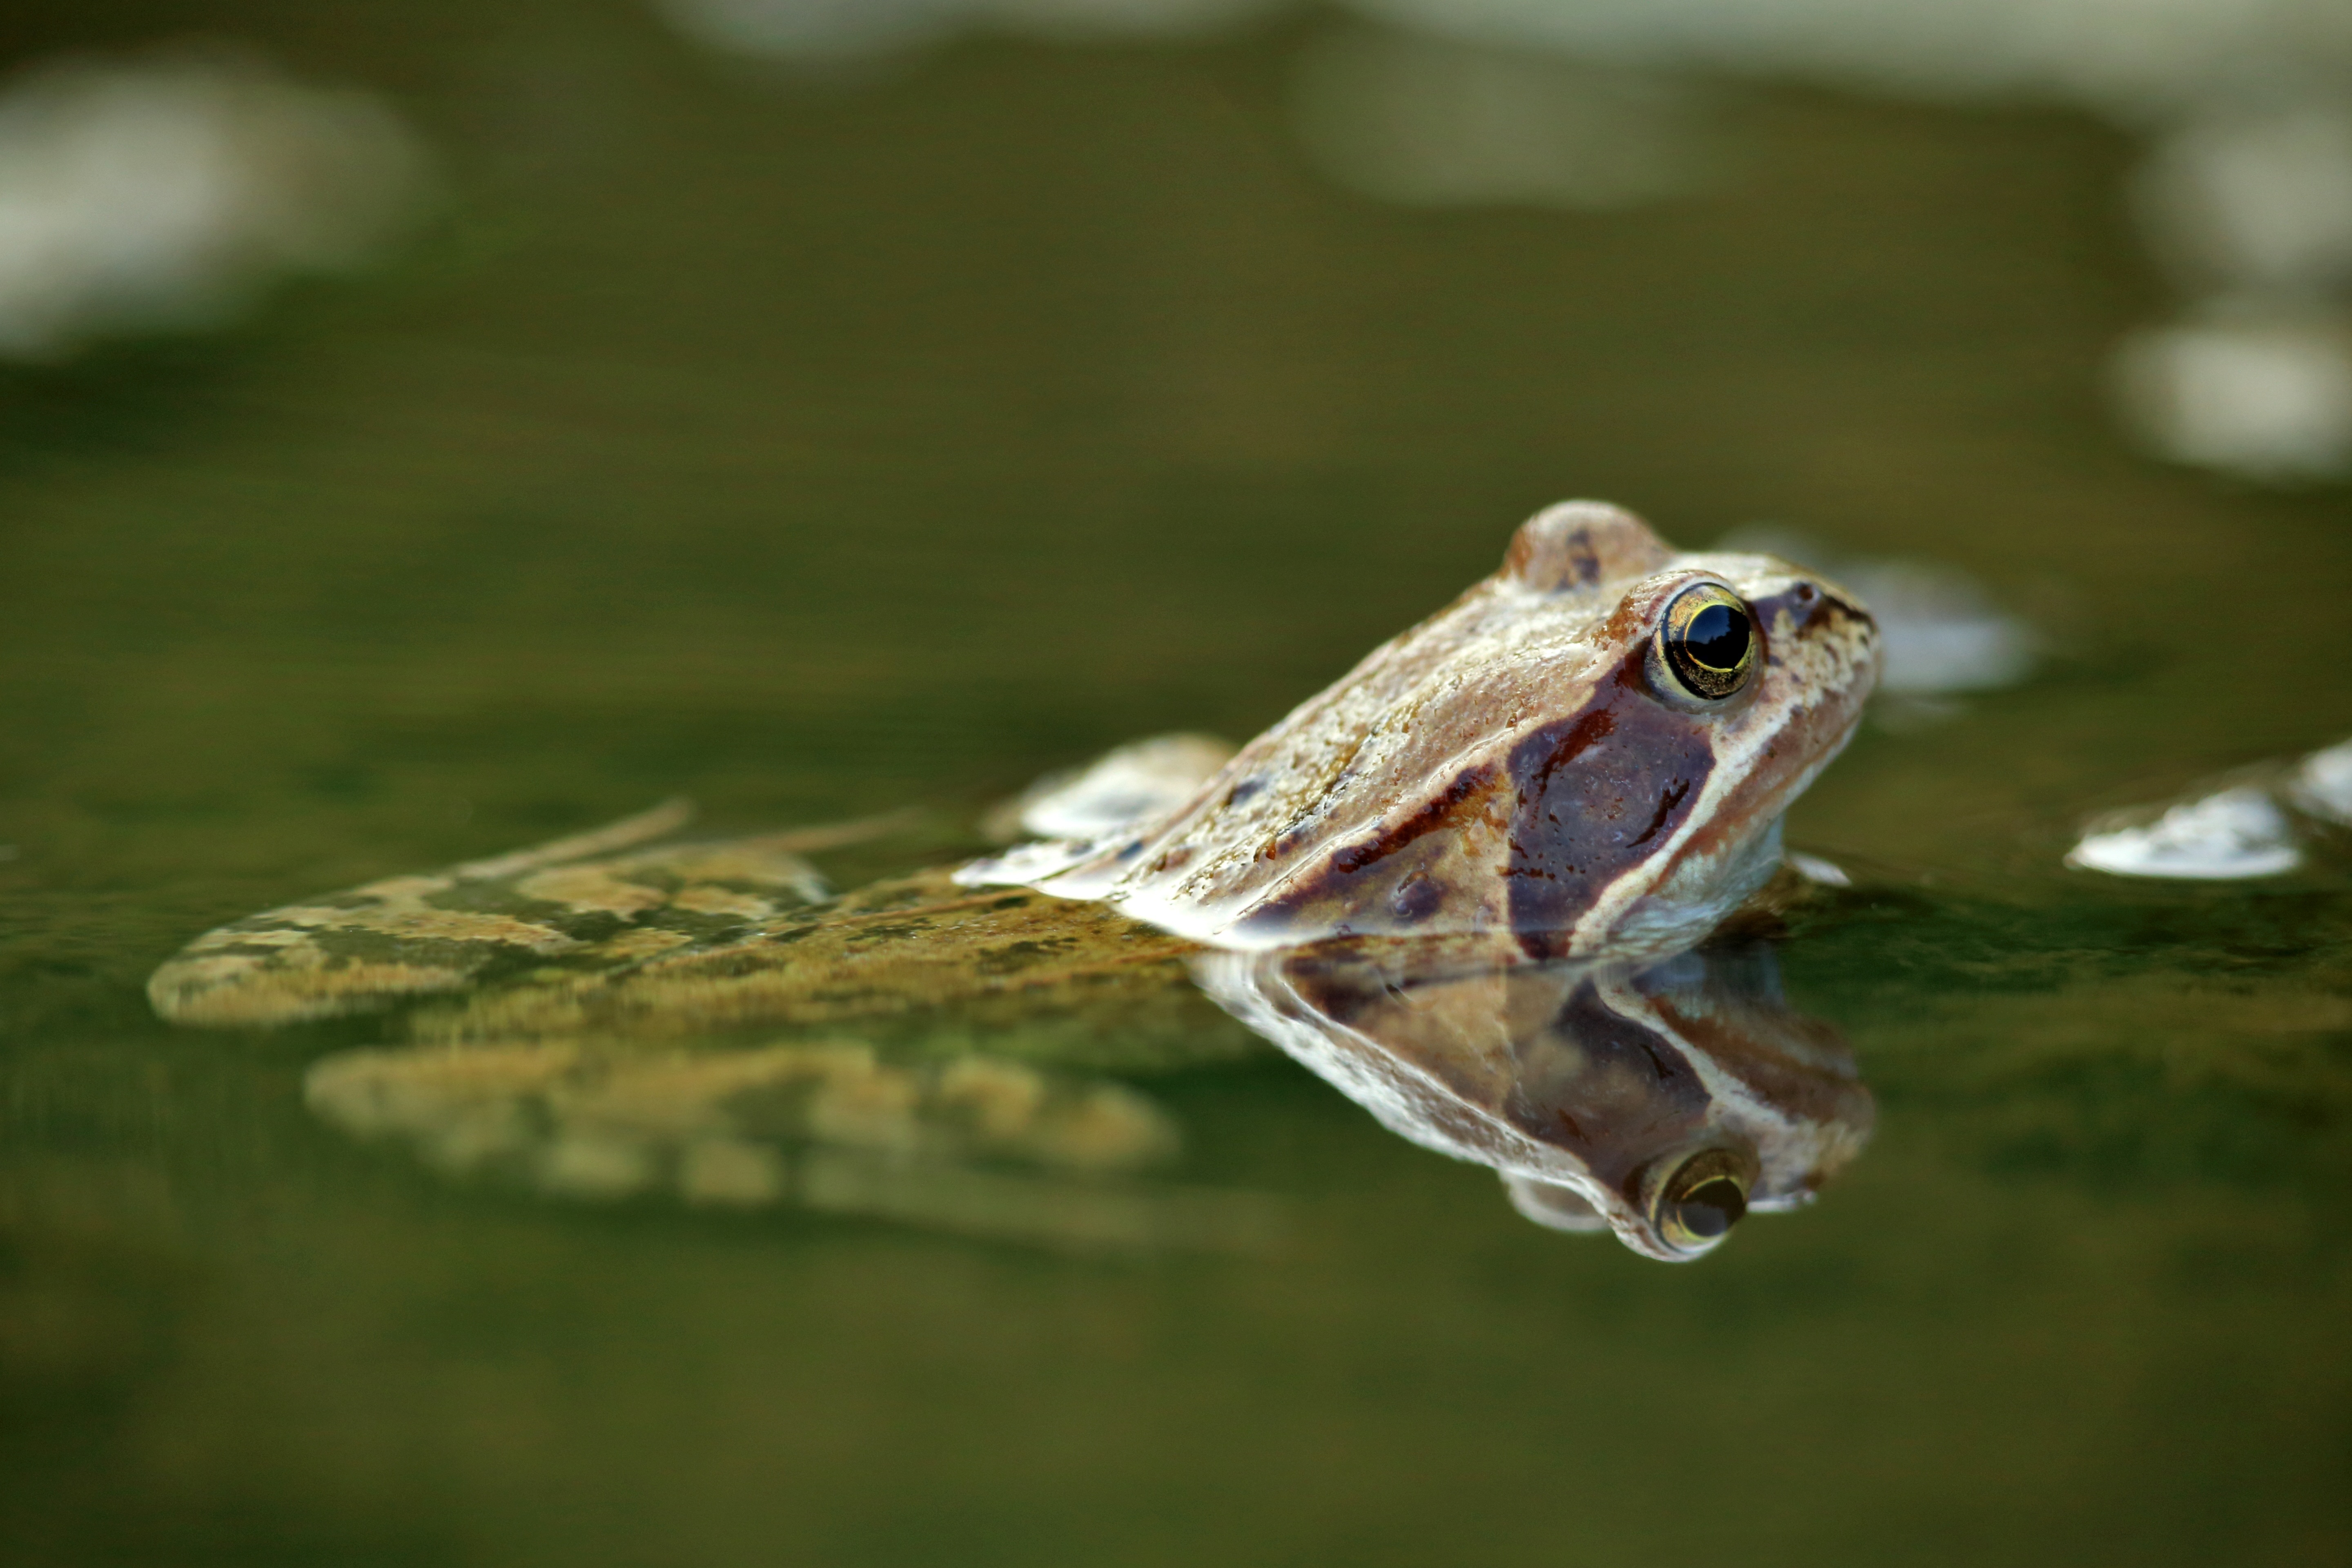 The Frog, Water, Amphibian, Nature, one animal, animals in the wild